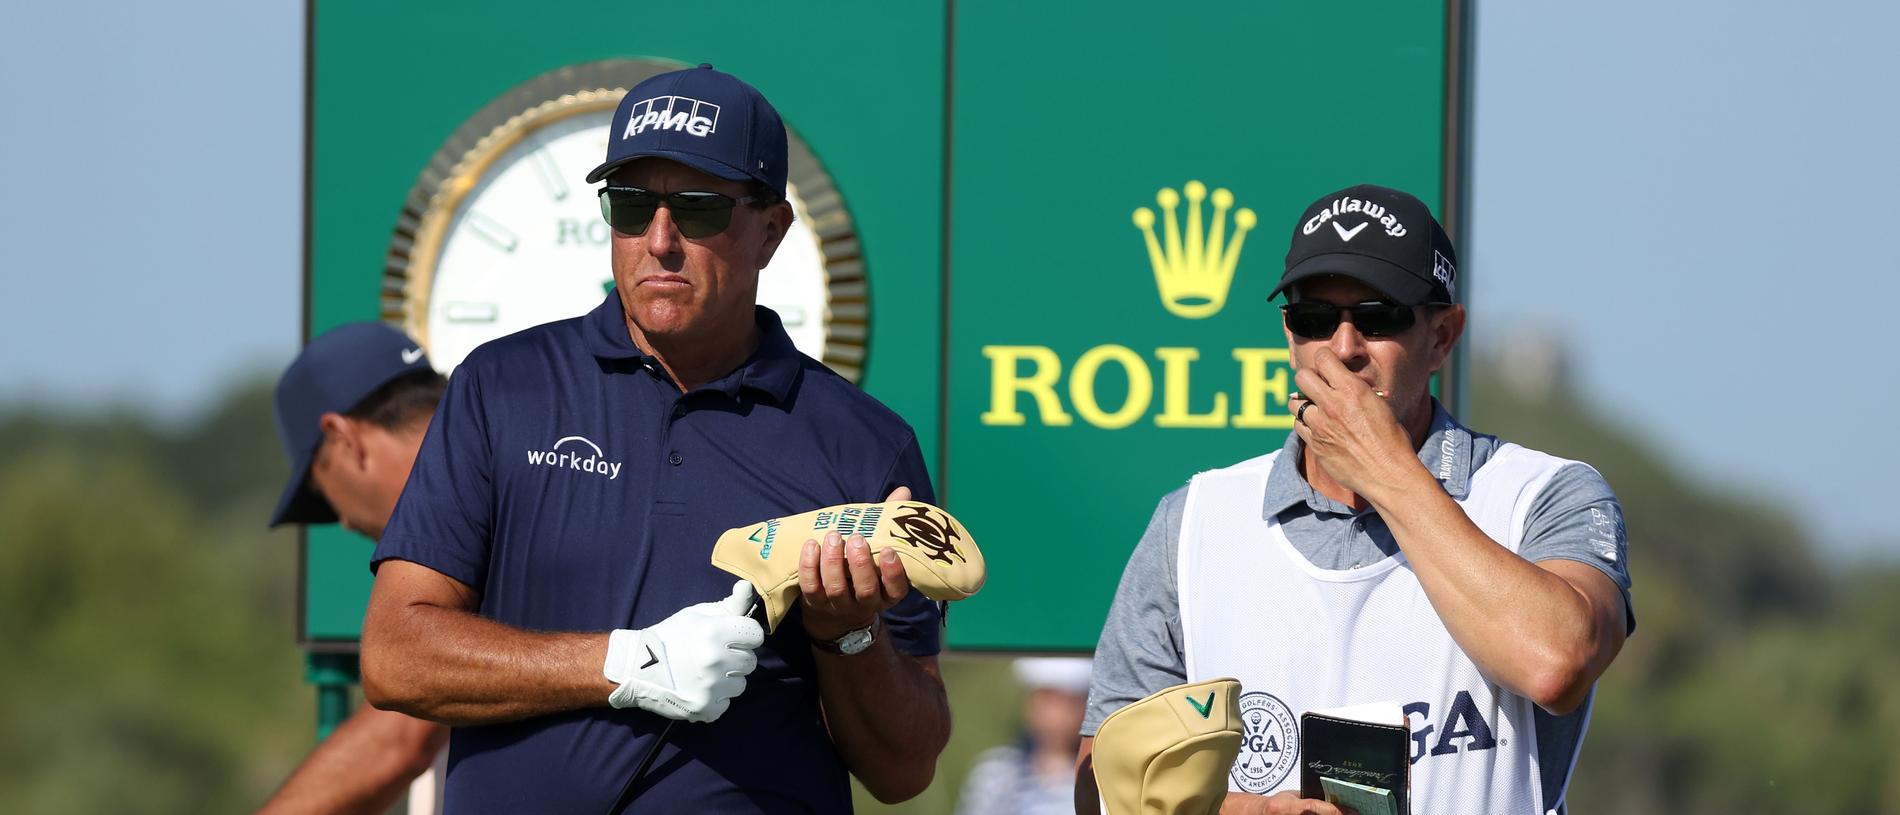 skarp sej Vejnavn PGA Championship 2021: Phil Mickelson, Tina Mickelson reveals mother Mary's  nervous texts, final round, news, caddie Tim Mickelson